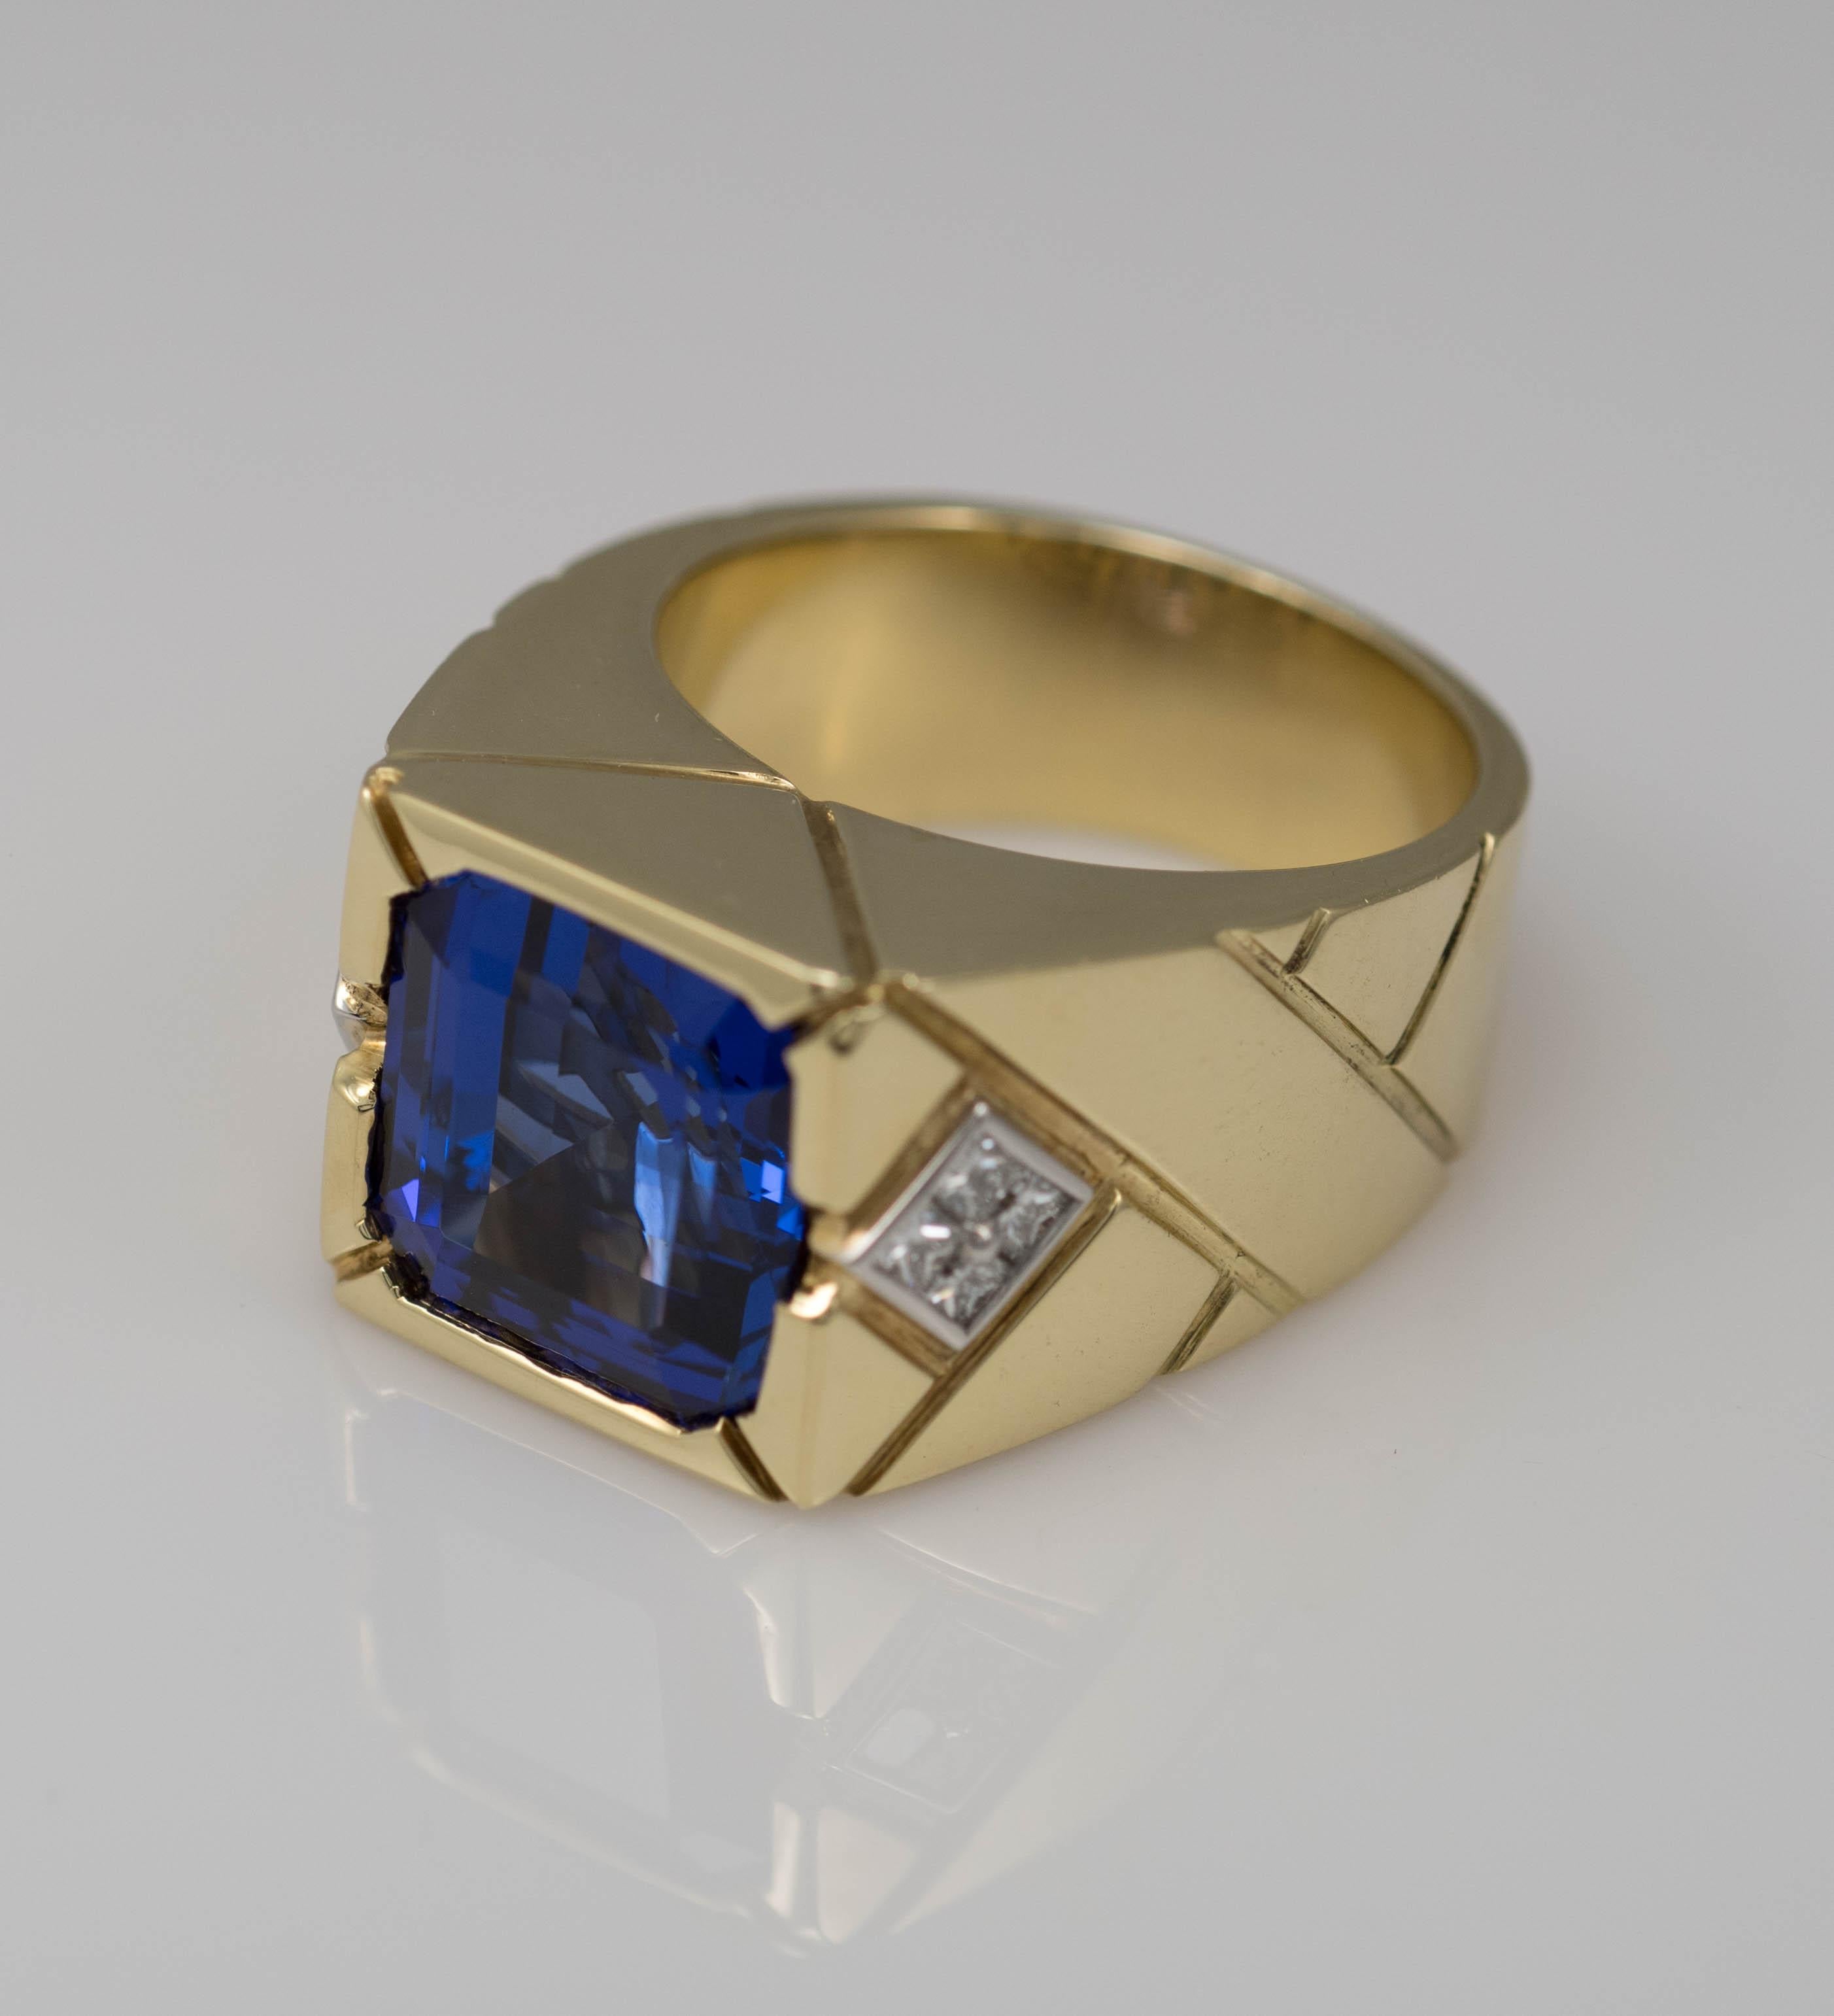 Men’s Custom Made Tanzanite And Diamond Ring In 18k Yellow Gold. Tests 18k And Weighs 38.7 Grams. Size 10.75
The Tanzanite Is An Emerald Cut, 11.55 Carats, Extra Fine, Bluish- Violet Color, Excellent Cut. (Dimensions 13.14 X 12.52 X 8.82mm).
On The